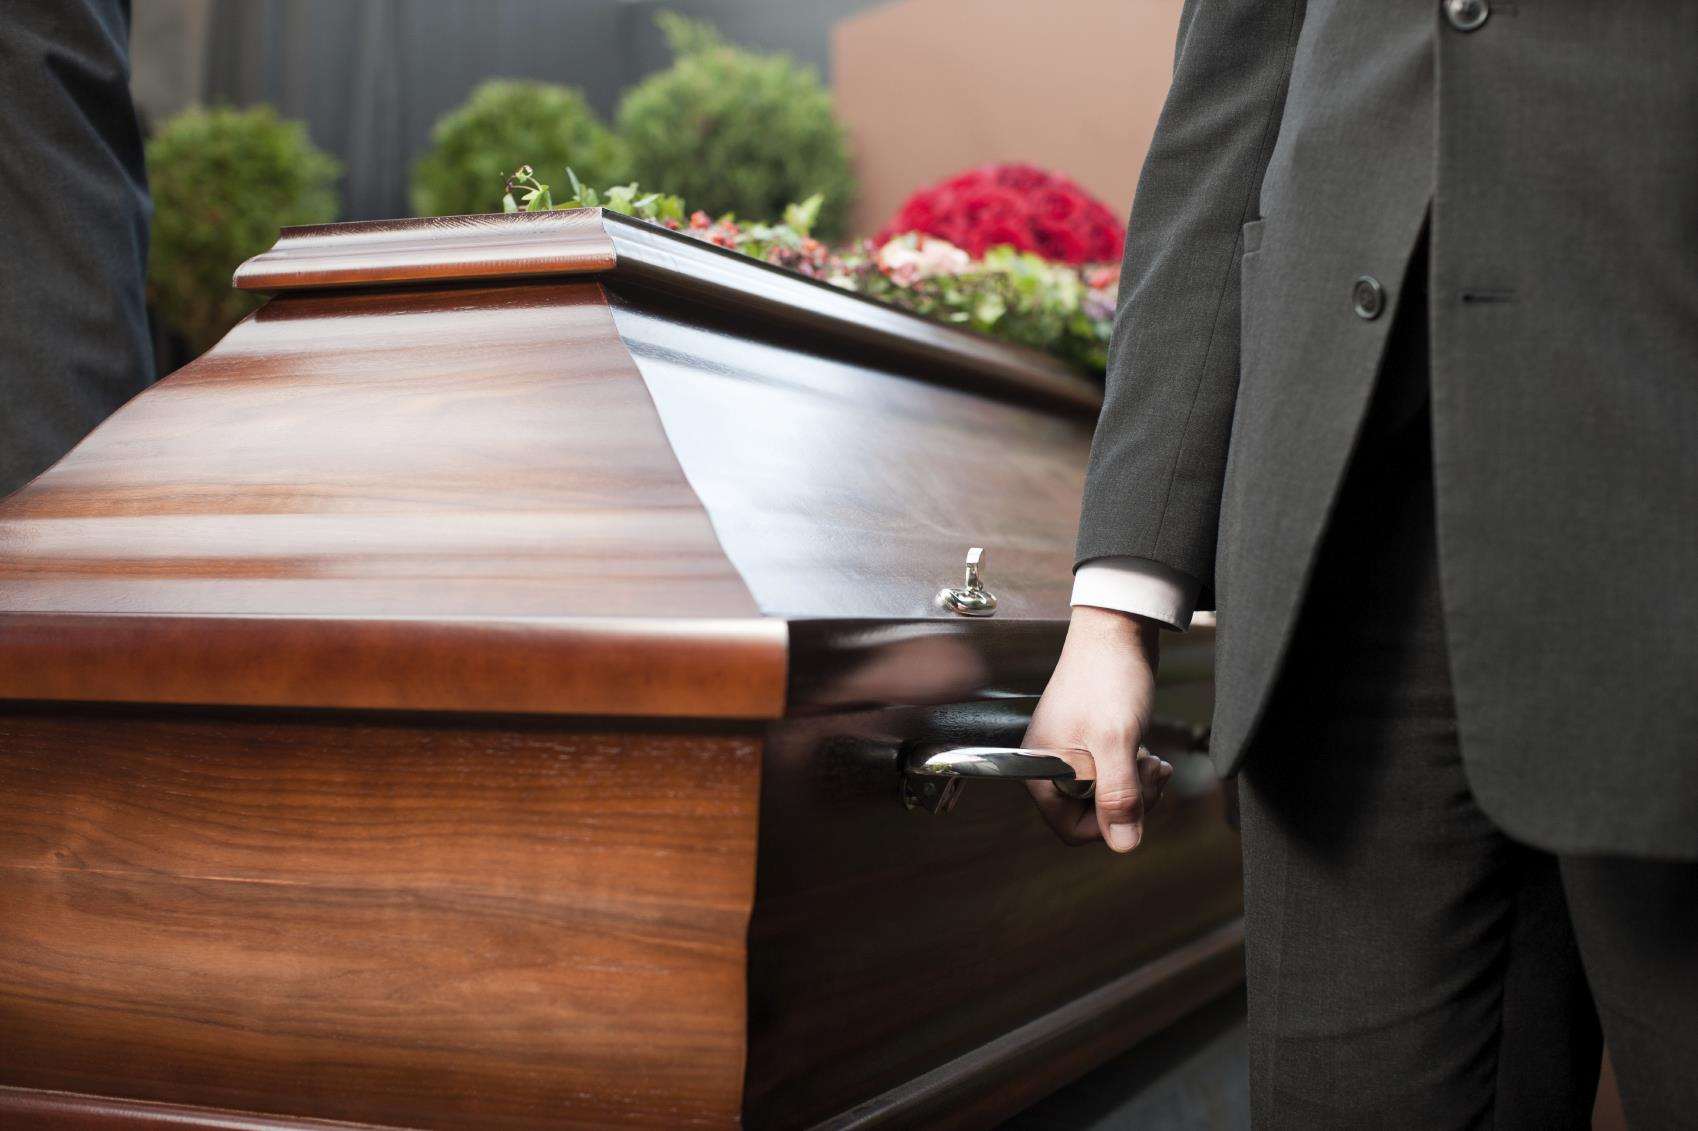 The council says only 55% of the 3.35 hectare site is needed to provide sufficient burial plots for the next 100 years. Picture: iStock.com